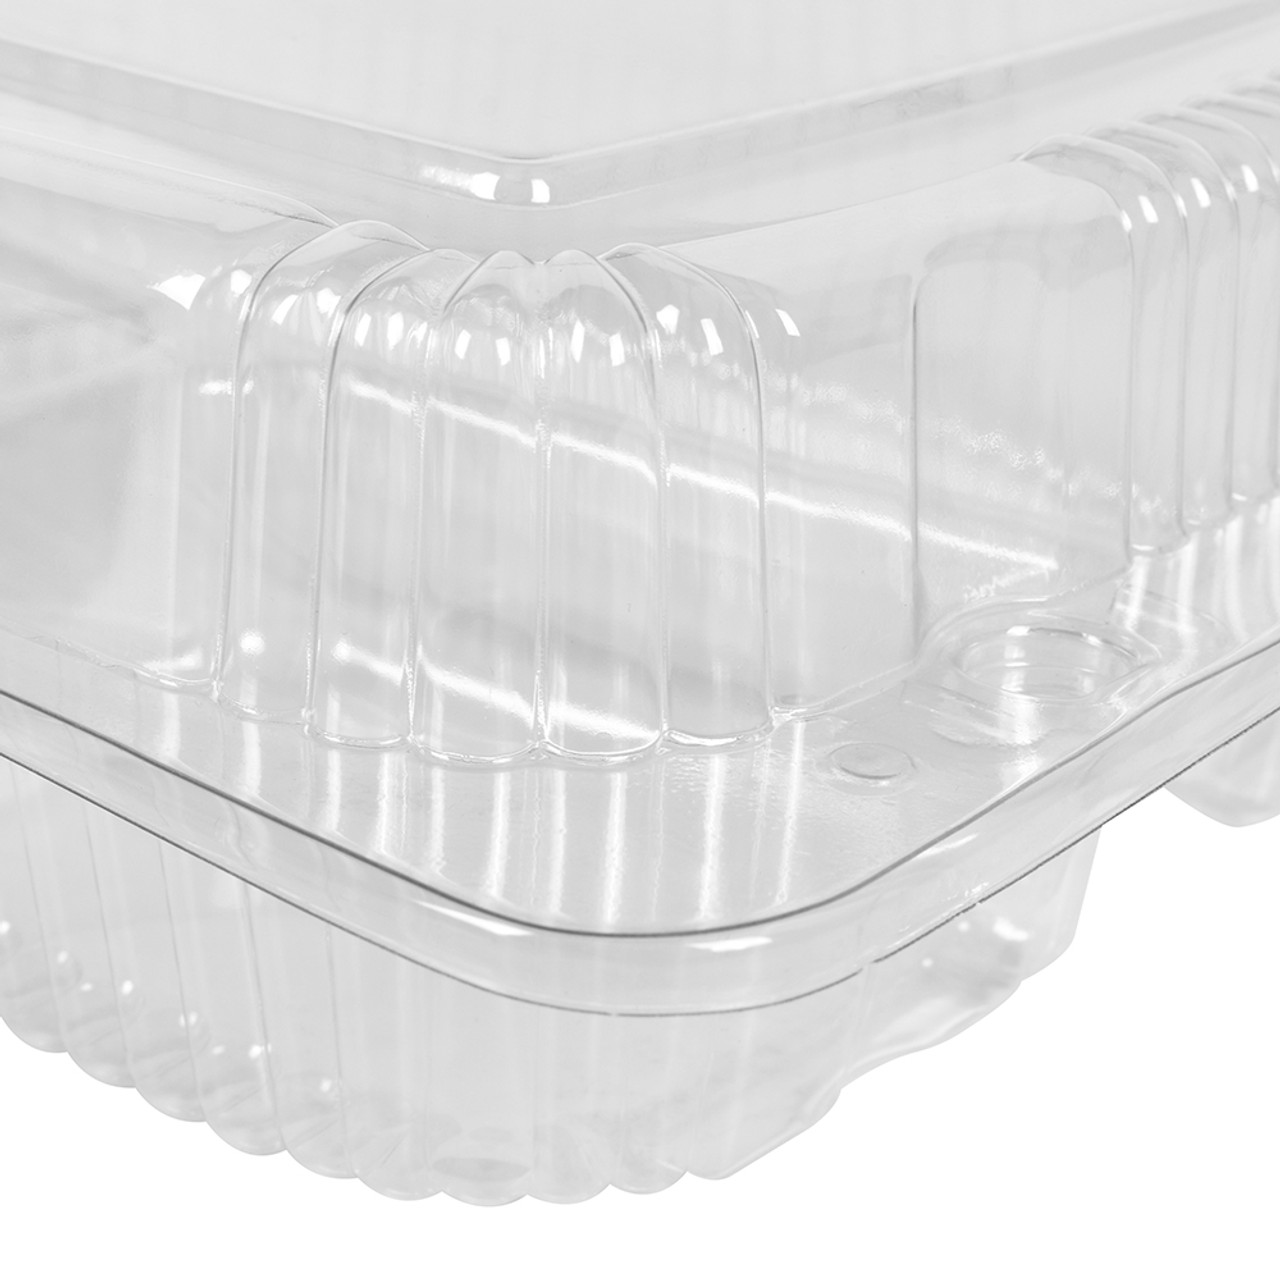 HD RE-342B 42OZ Rect 3-Comp Plastic Container and Lid, 150 Sets